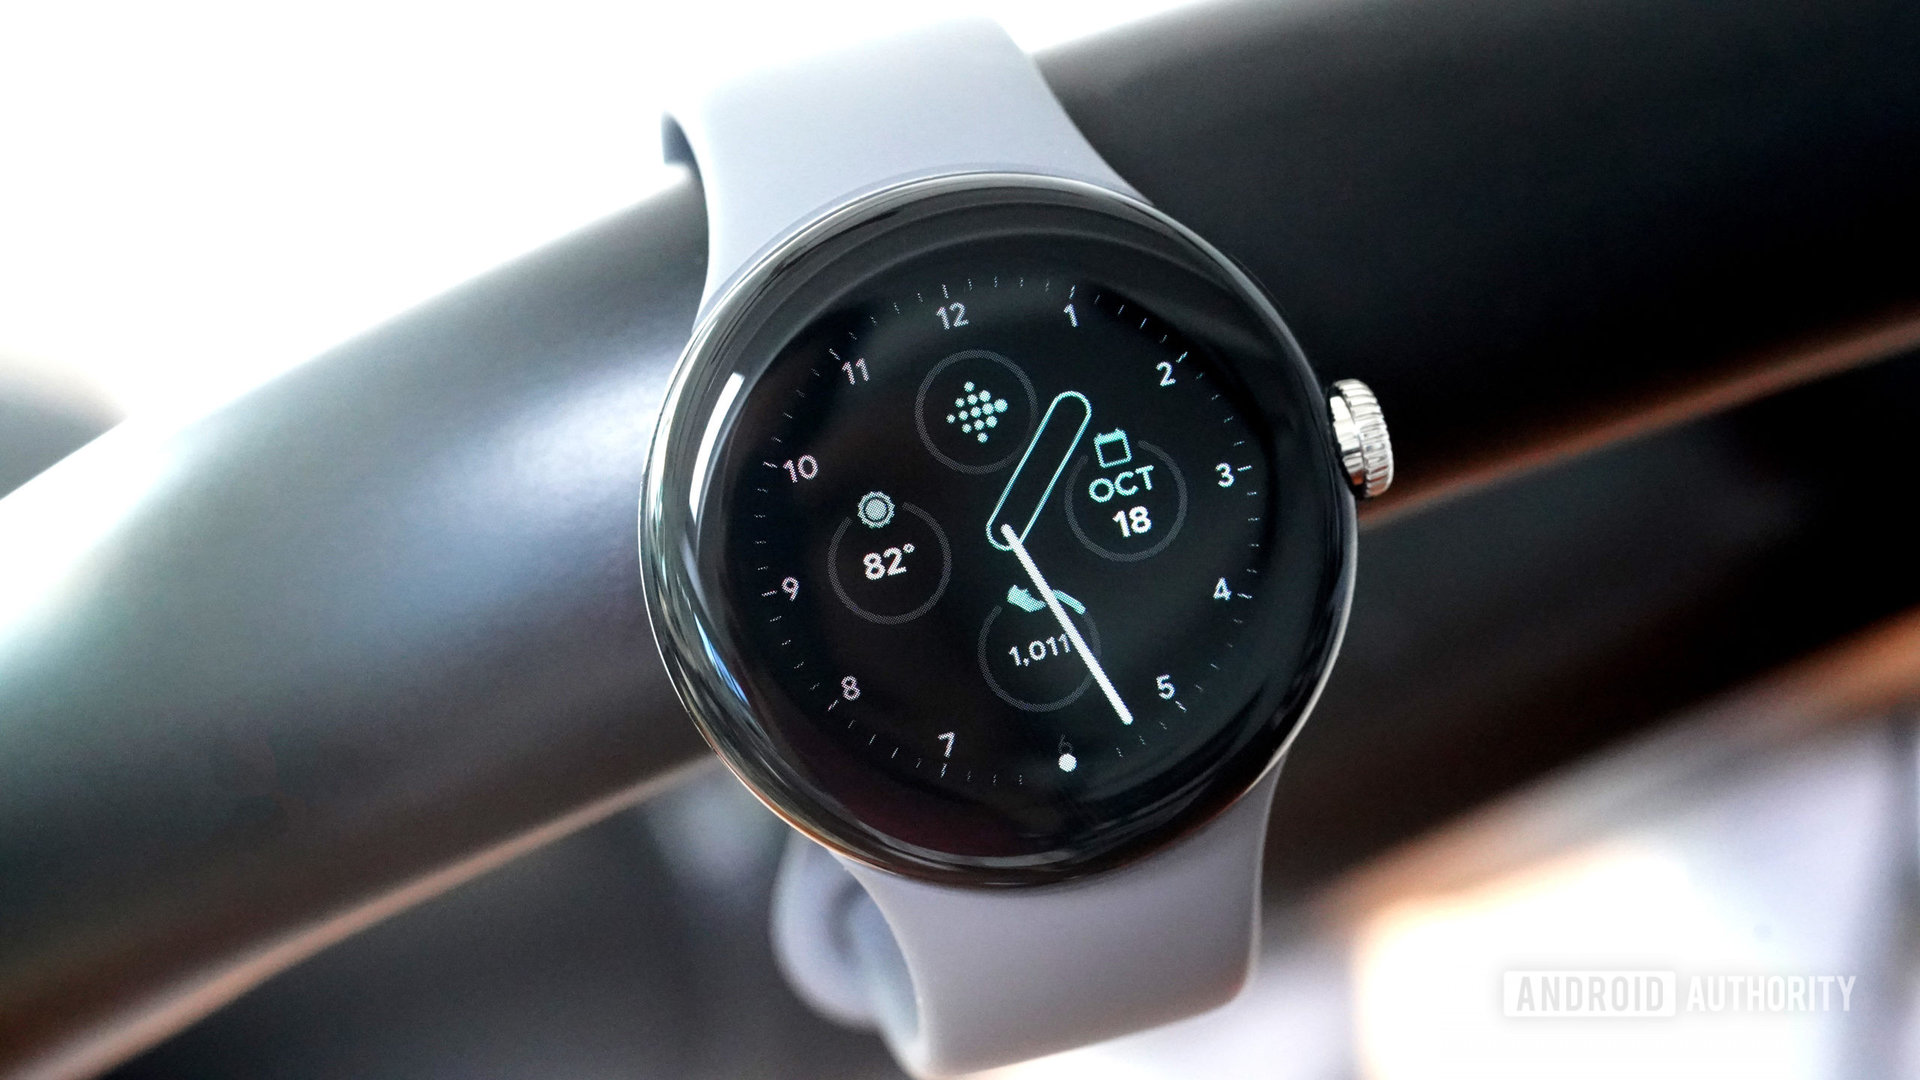 Google Pixel Watch buyer's guide: Price, features, and more